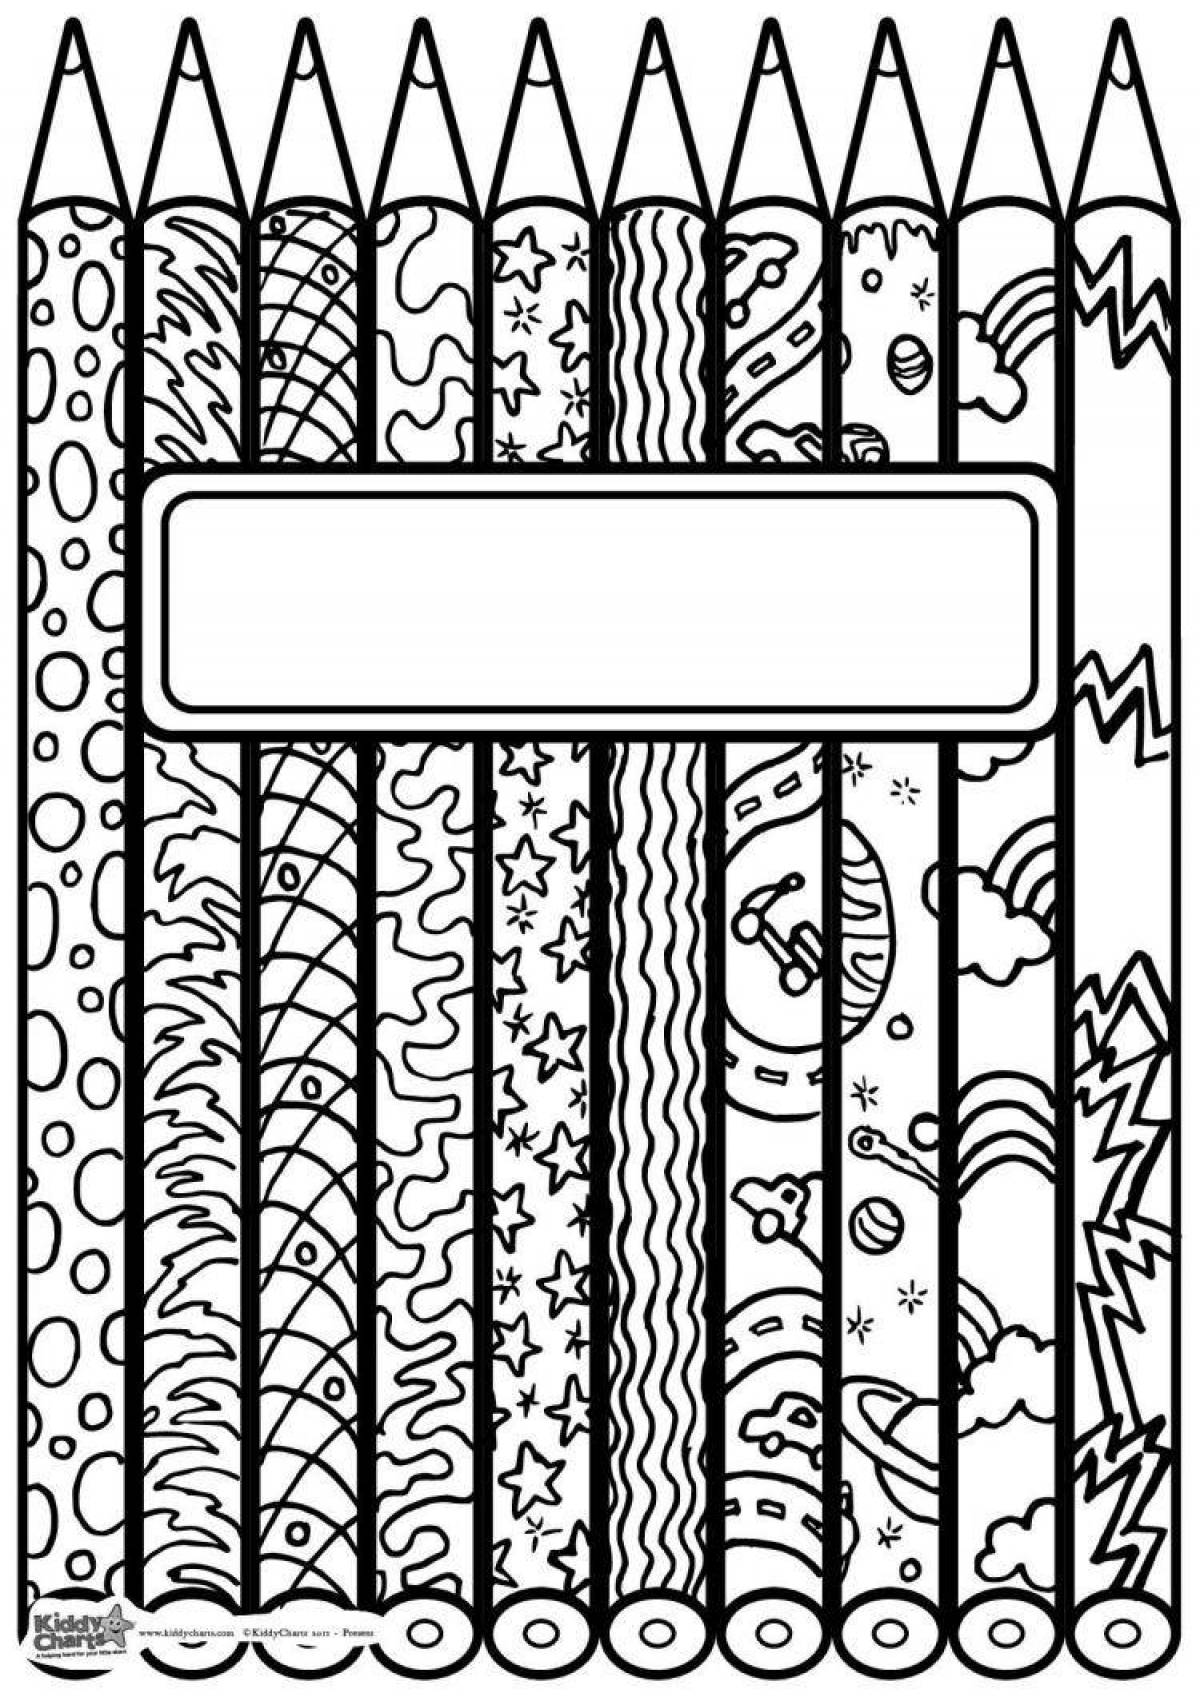 Fun coloring book with black sheets